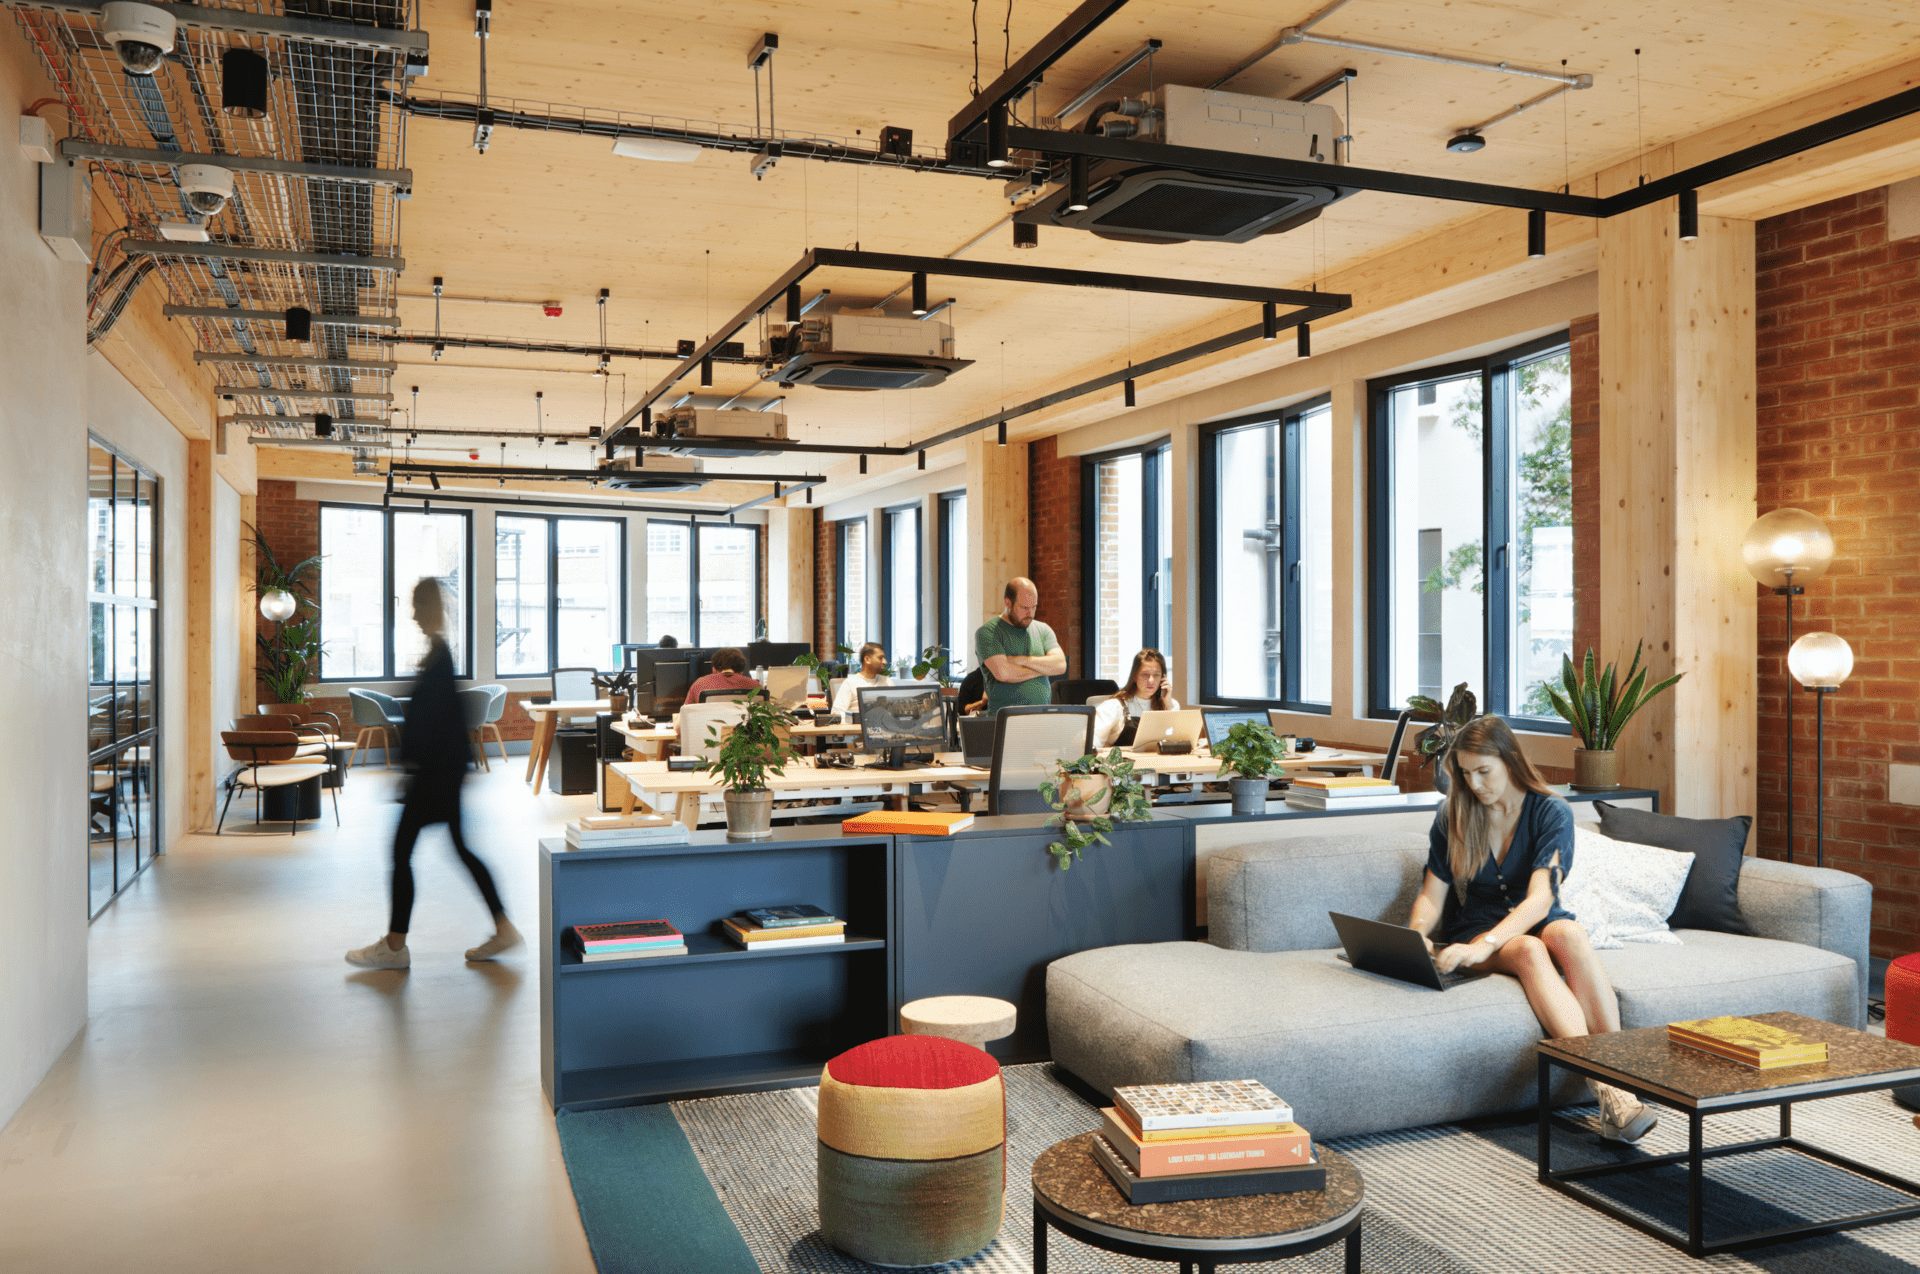 Squire & Partners, London, office interiors, architecture, brixton, The Department Store Studios, sustainability, OnOffice magazine